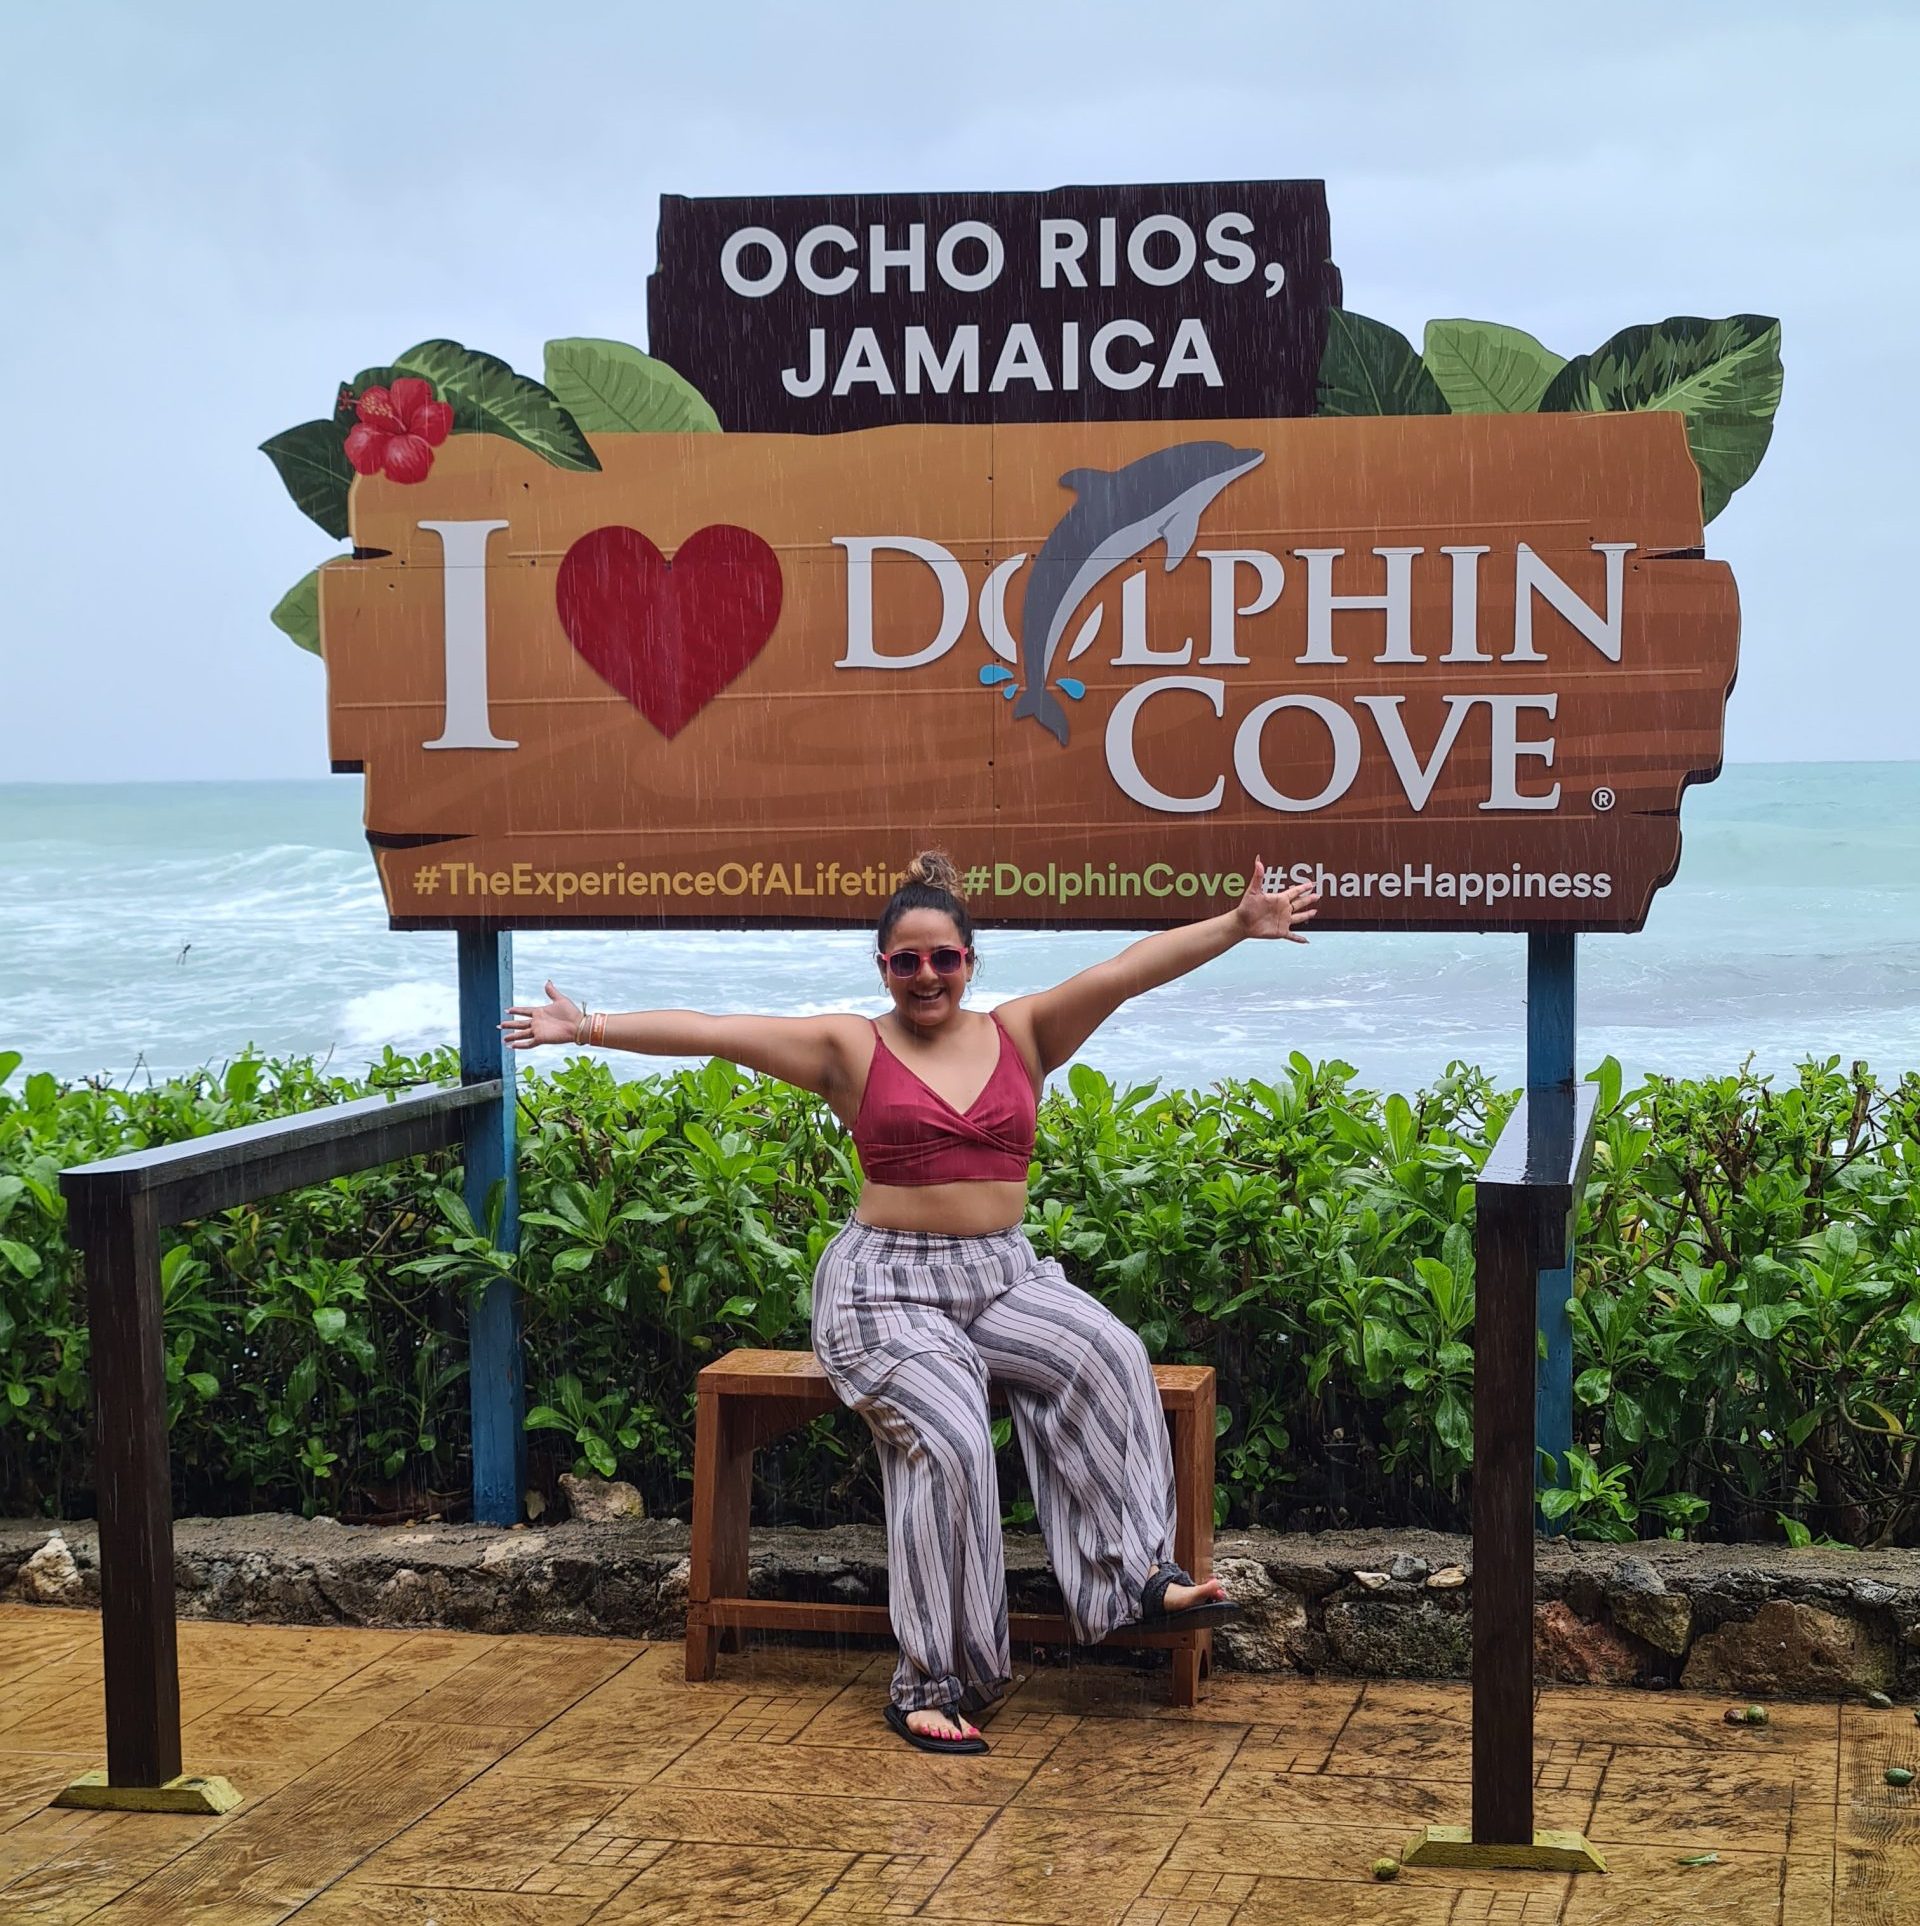 Visiting Dolphin Cove Ocho Rios Jamaica: What To Expect